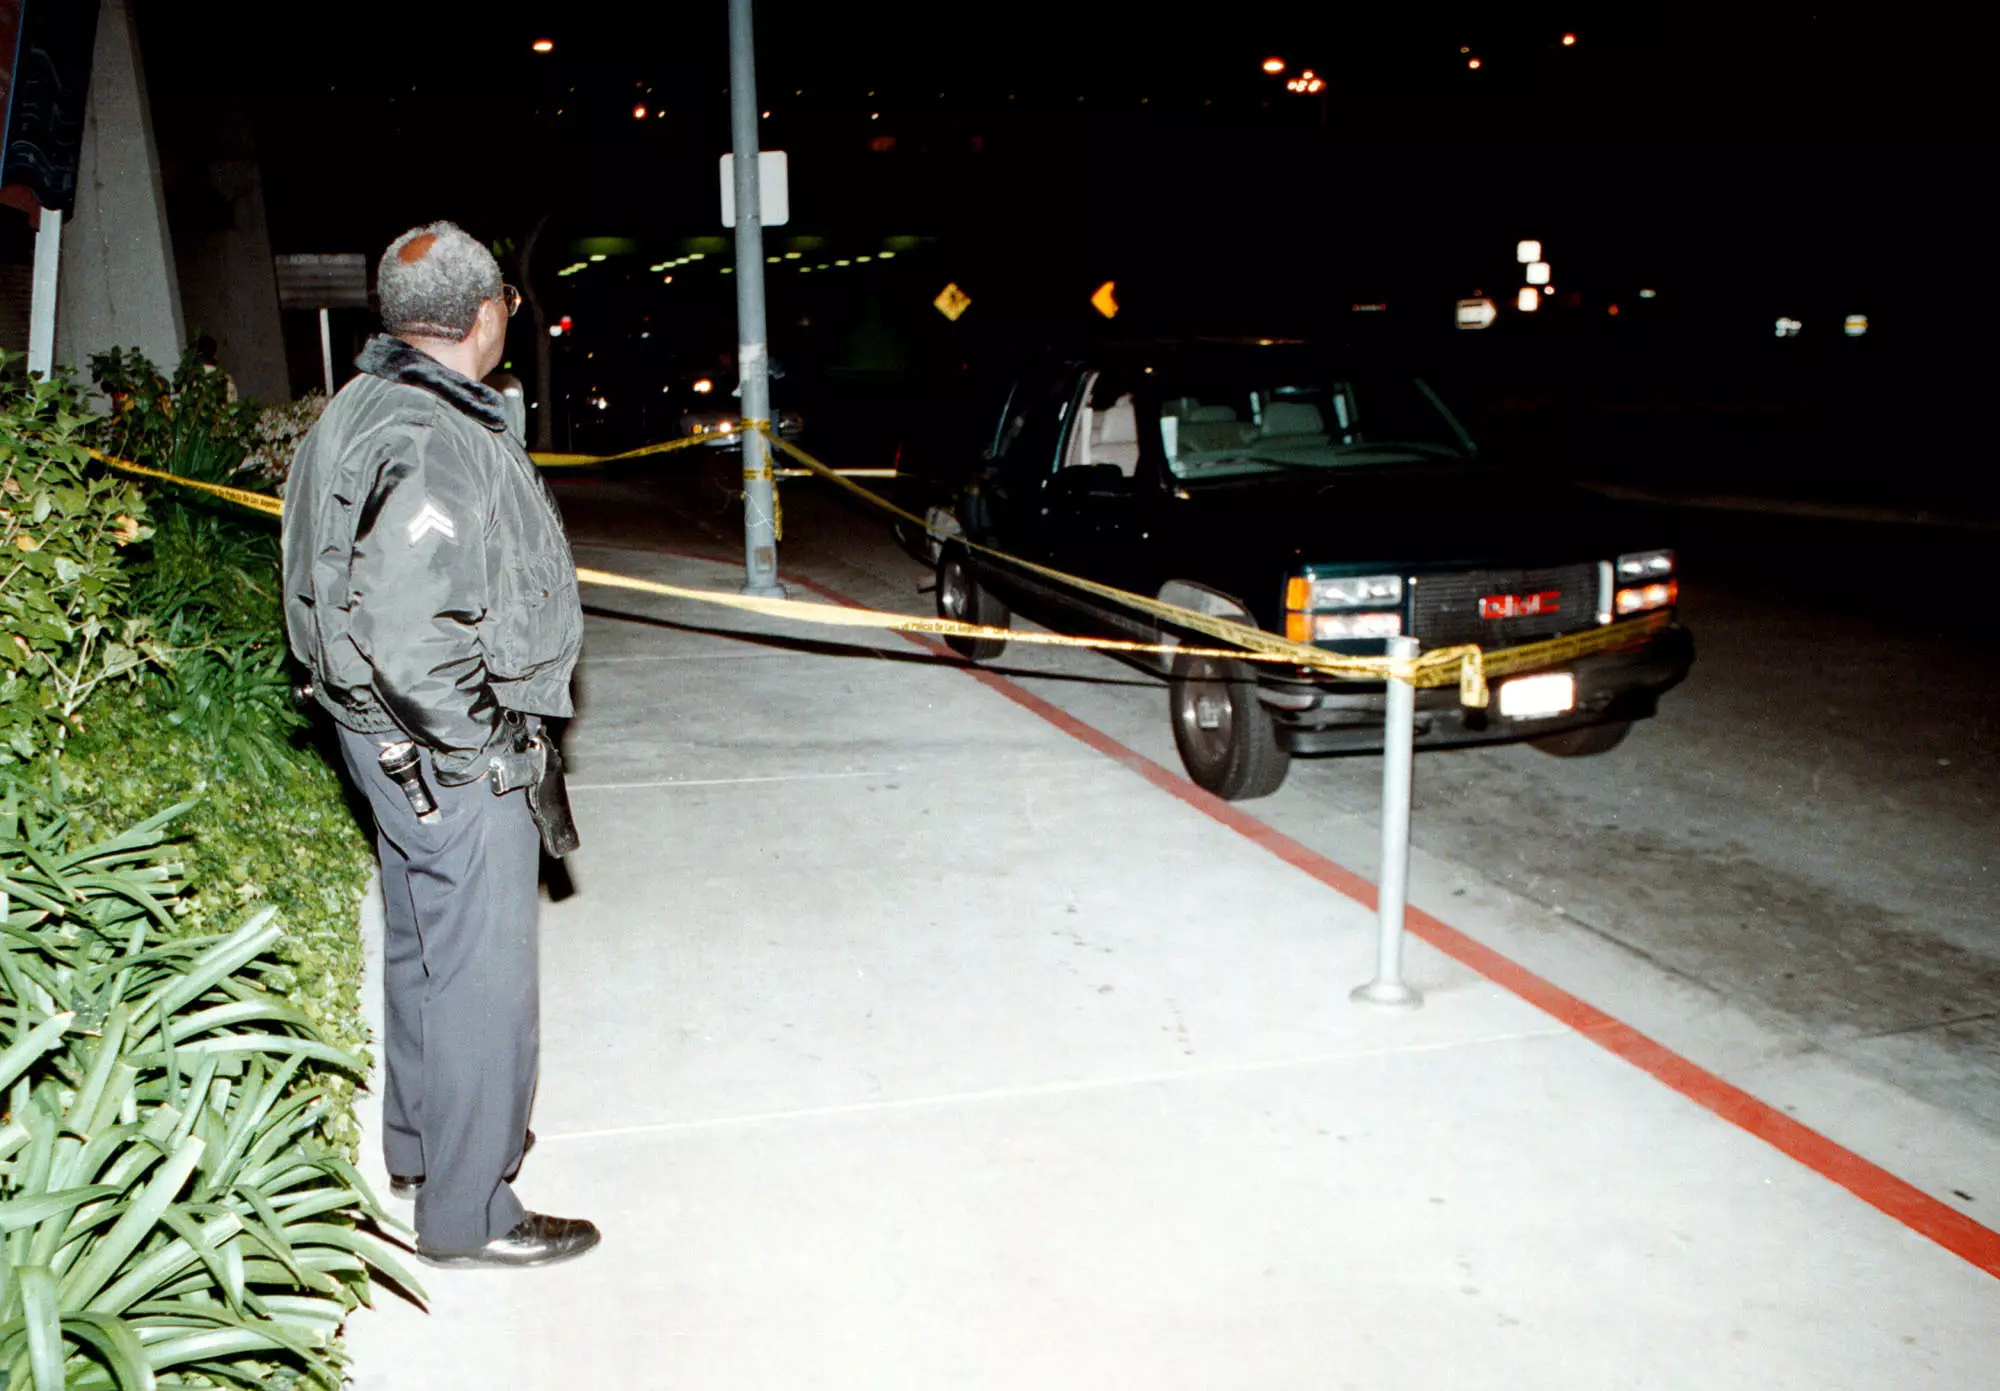 An LAPD officer watches over the GMC Suburban, which Wallace was inside when he was shot.